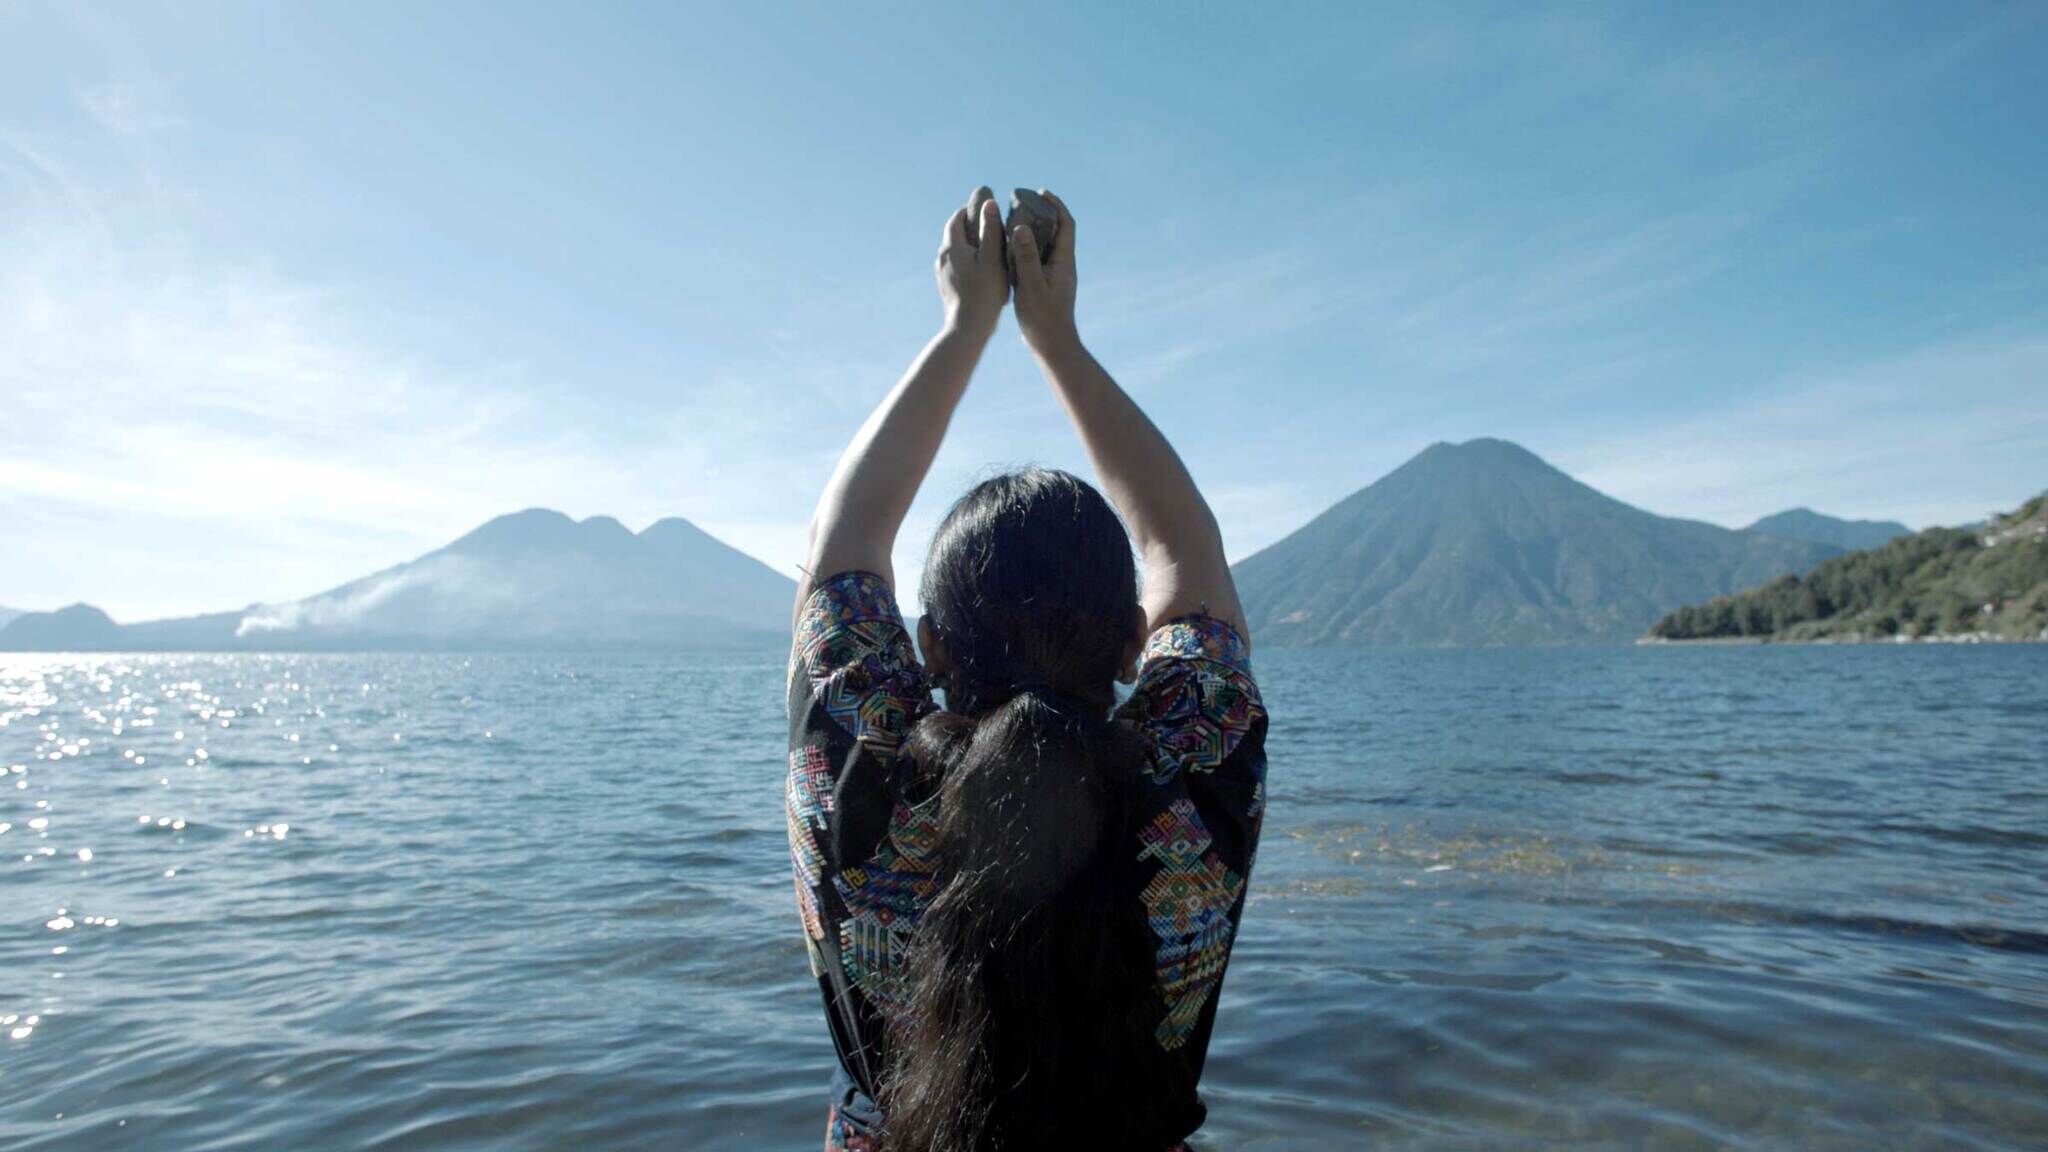 Person with arms raised facing a serene lake and mountains.